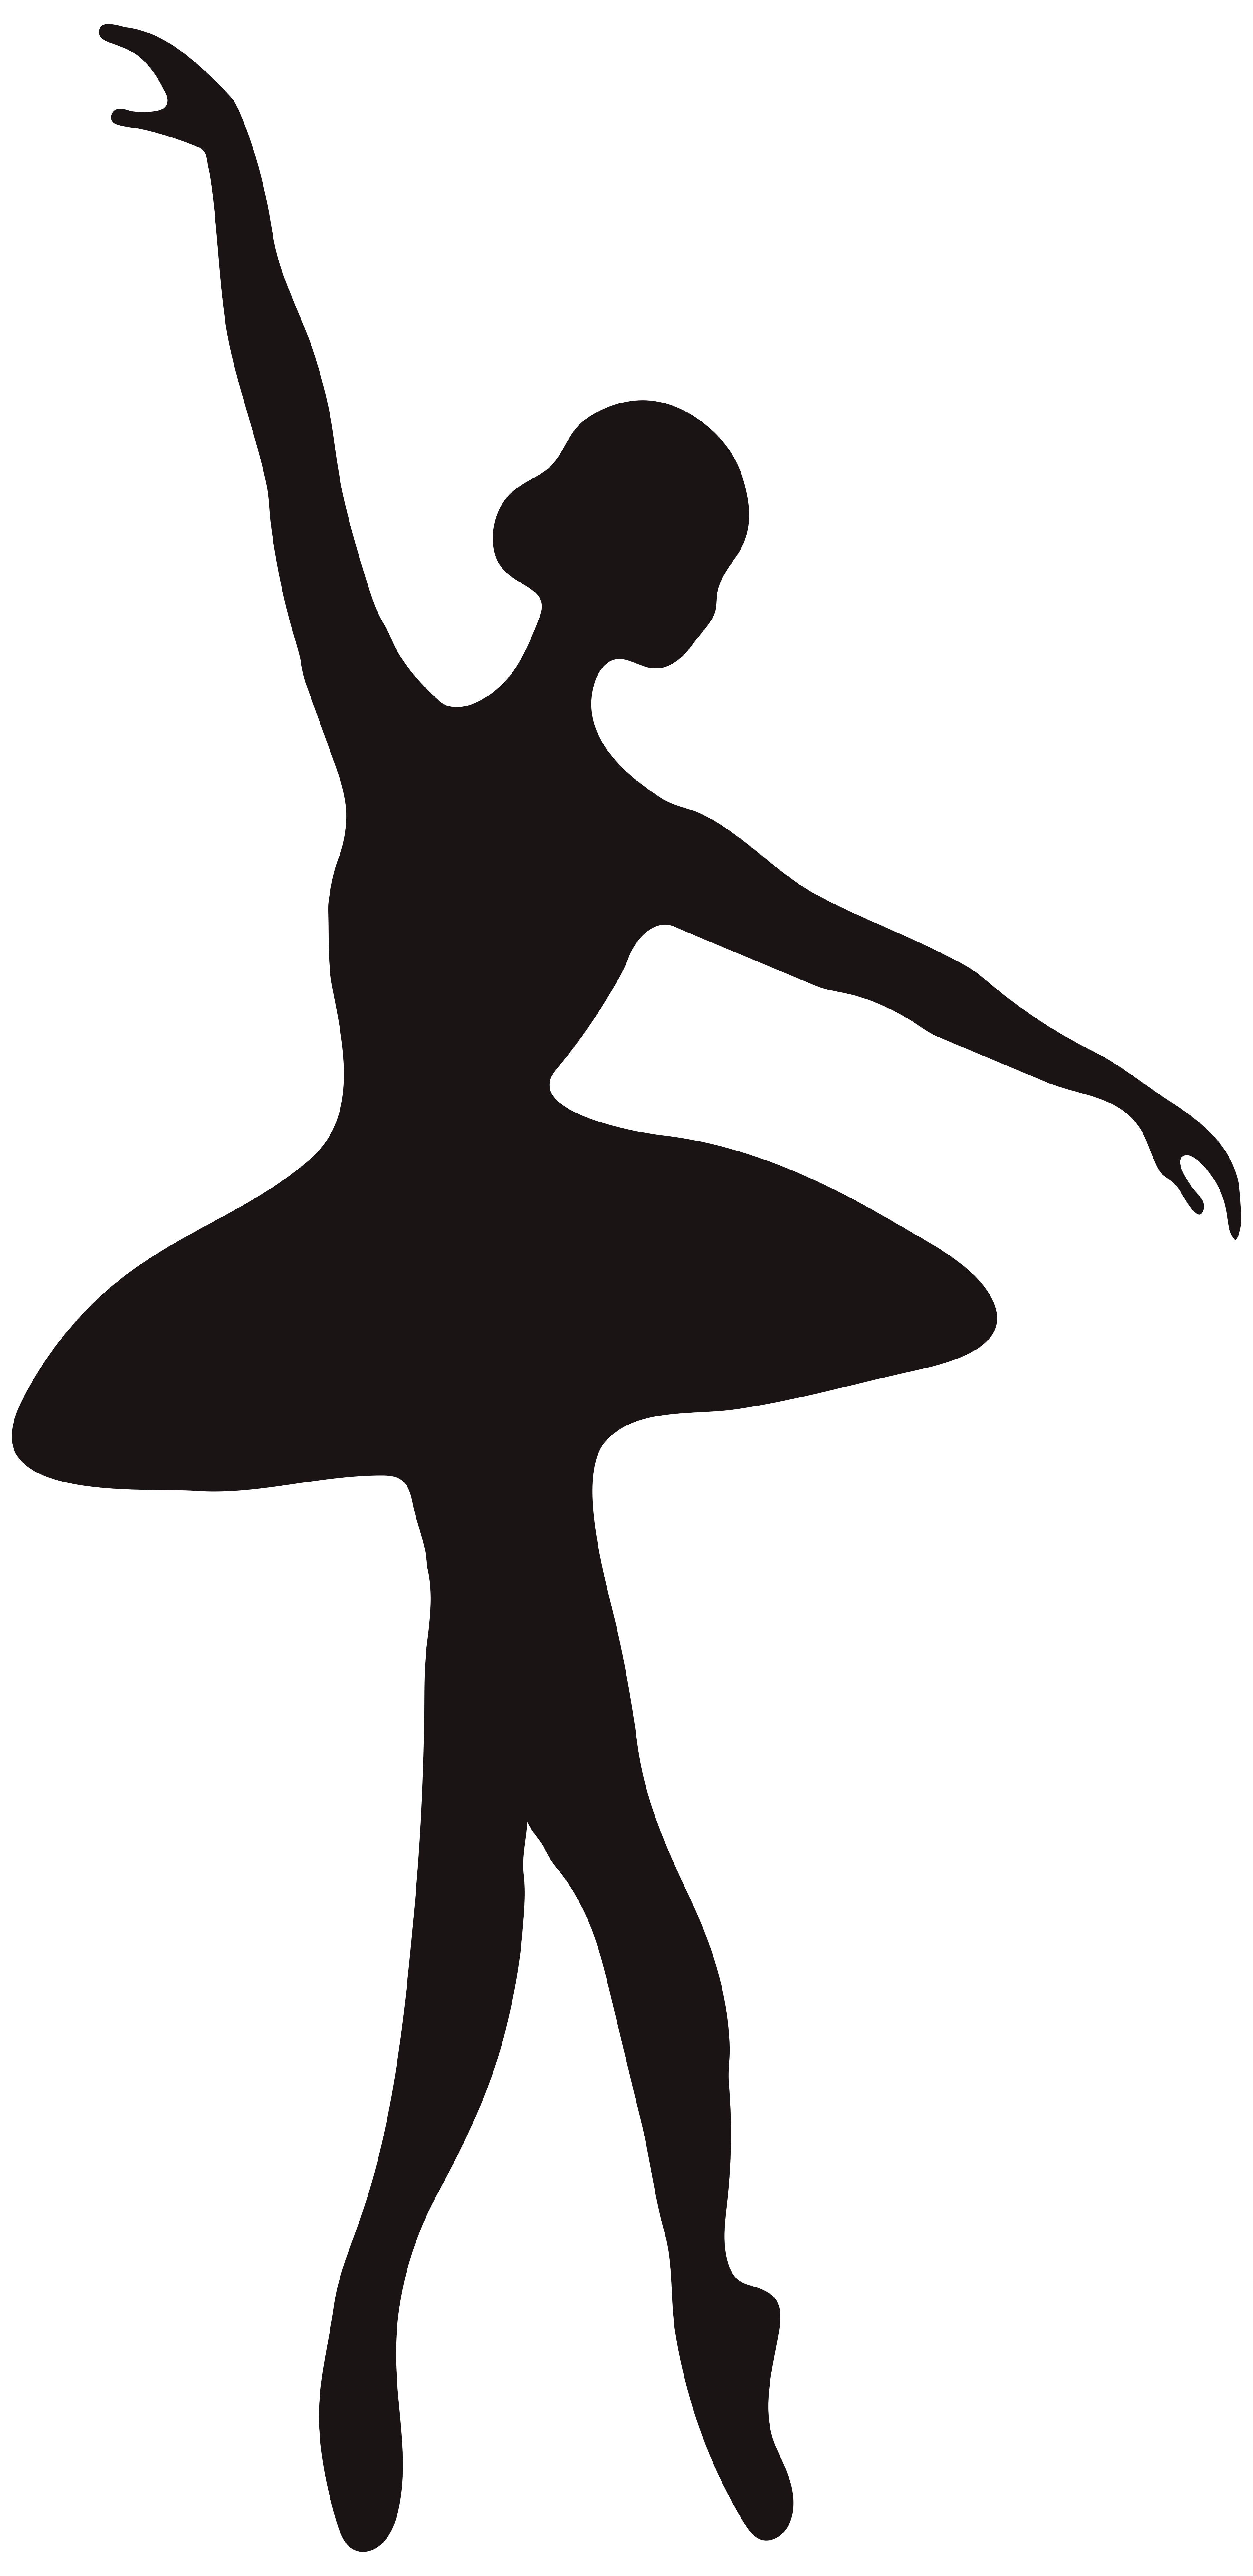 Ballerina Silhouette PNG Clip Art | Gallery Yopriceville - High-Quality and Transparent PNG Clipart